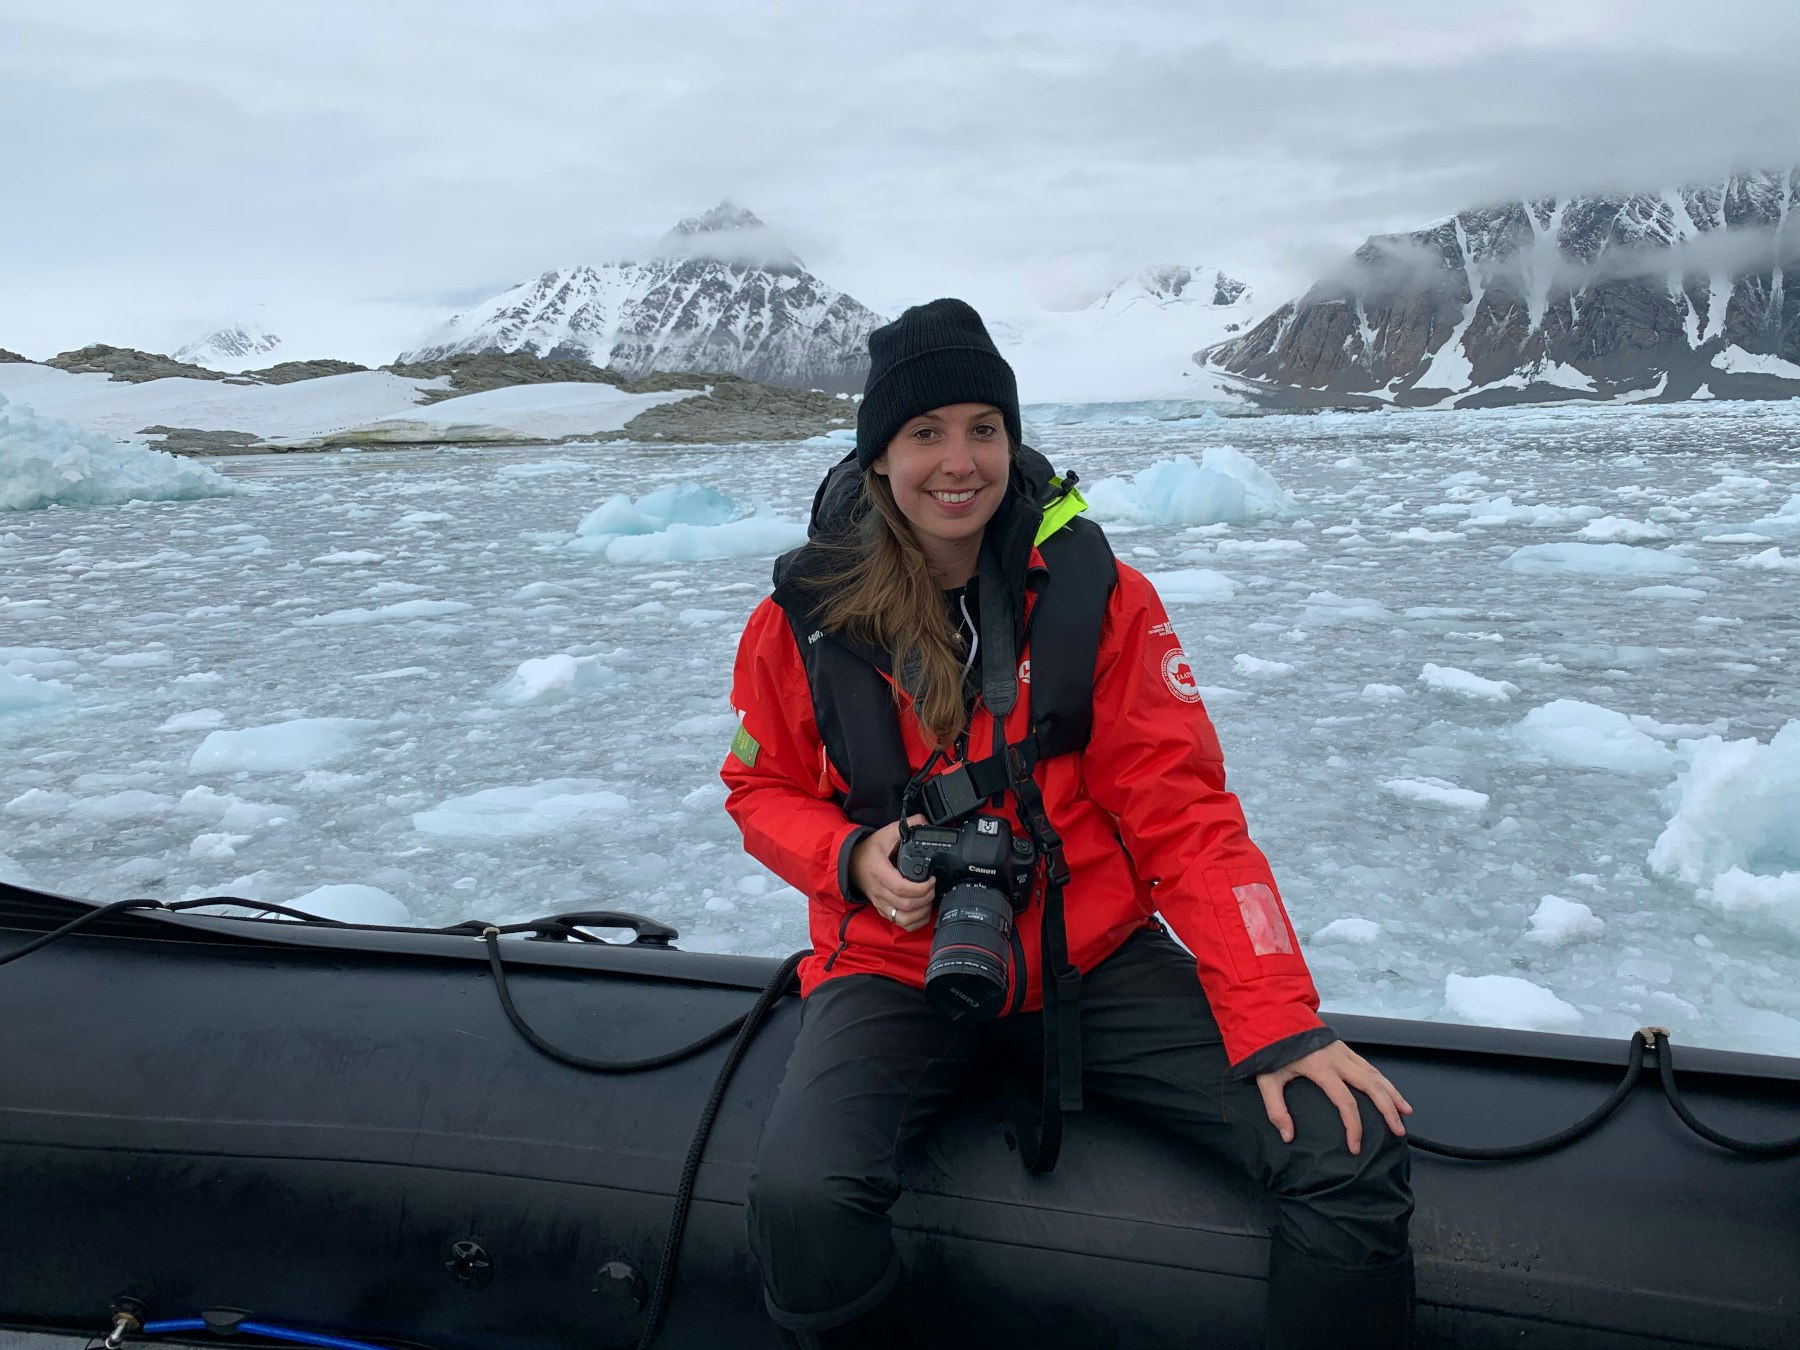 The author sits on the edge of a boat, camera around her neck, with icebergs in the back,